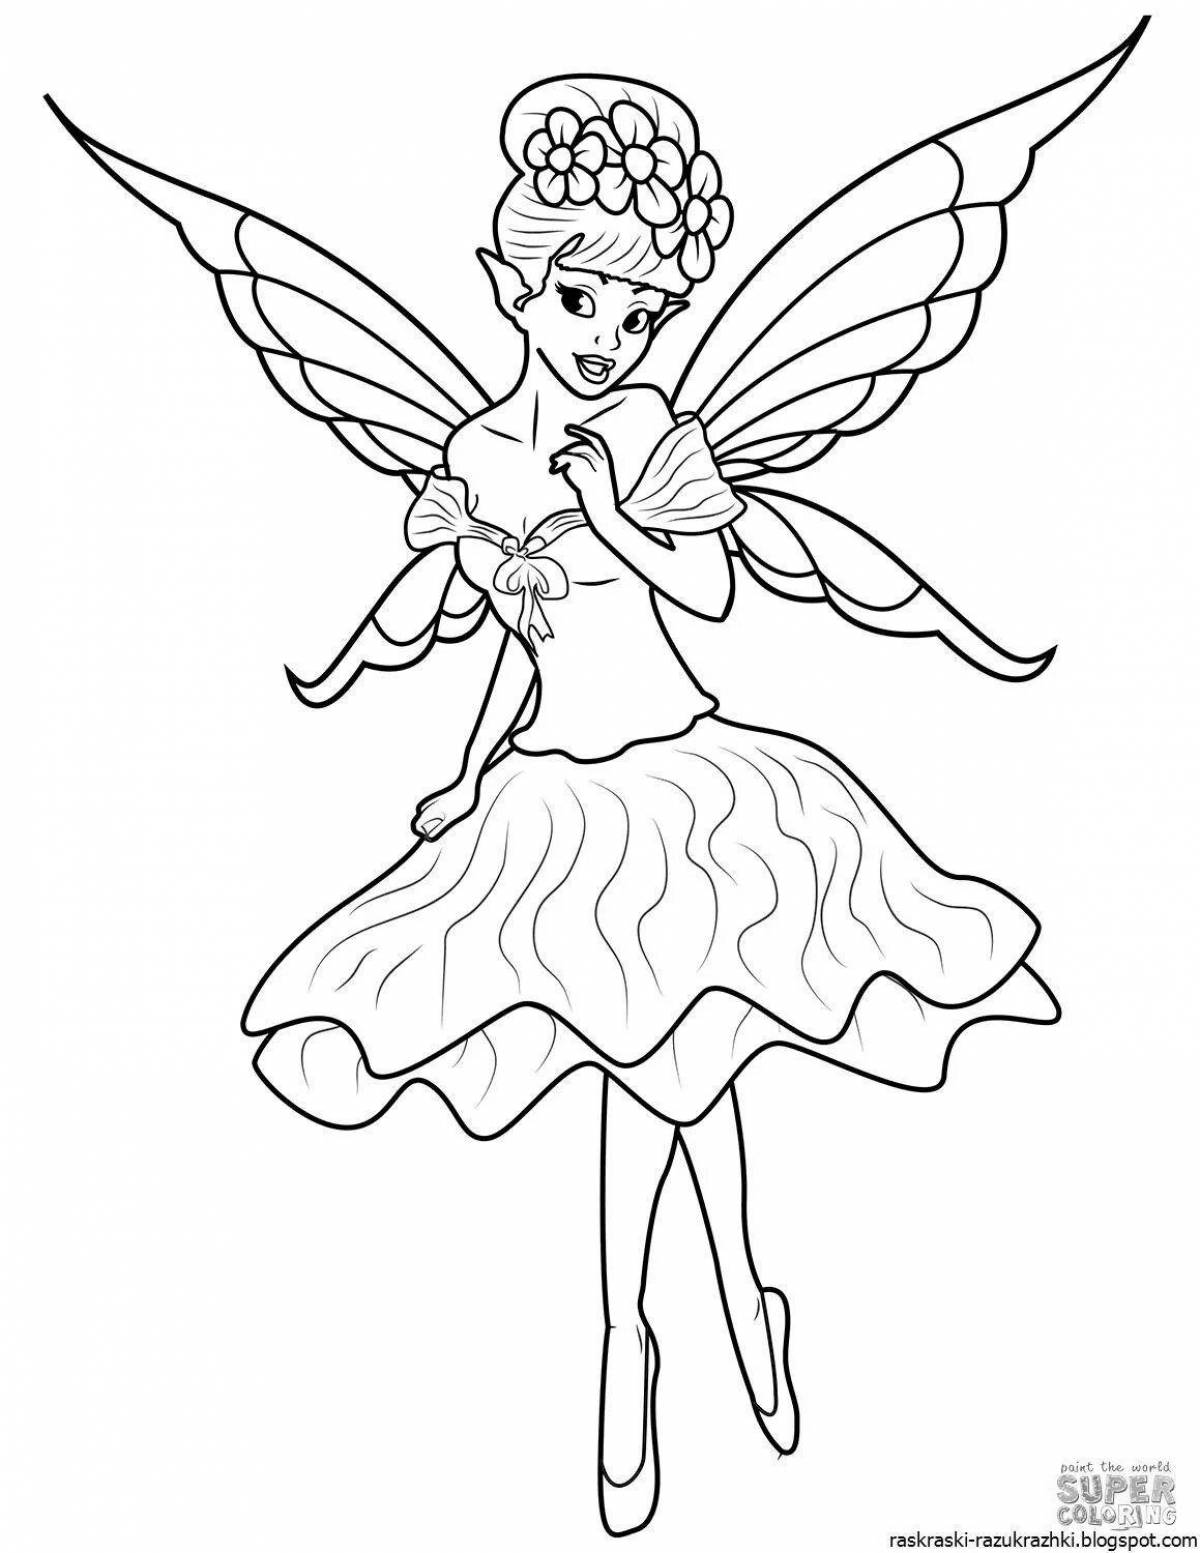 Coloring book fluttering fairies for children 5-6 years old